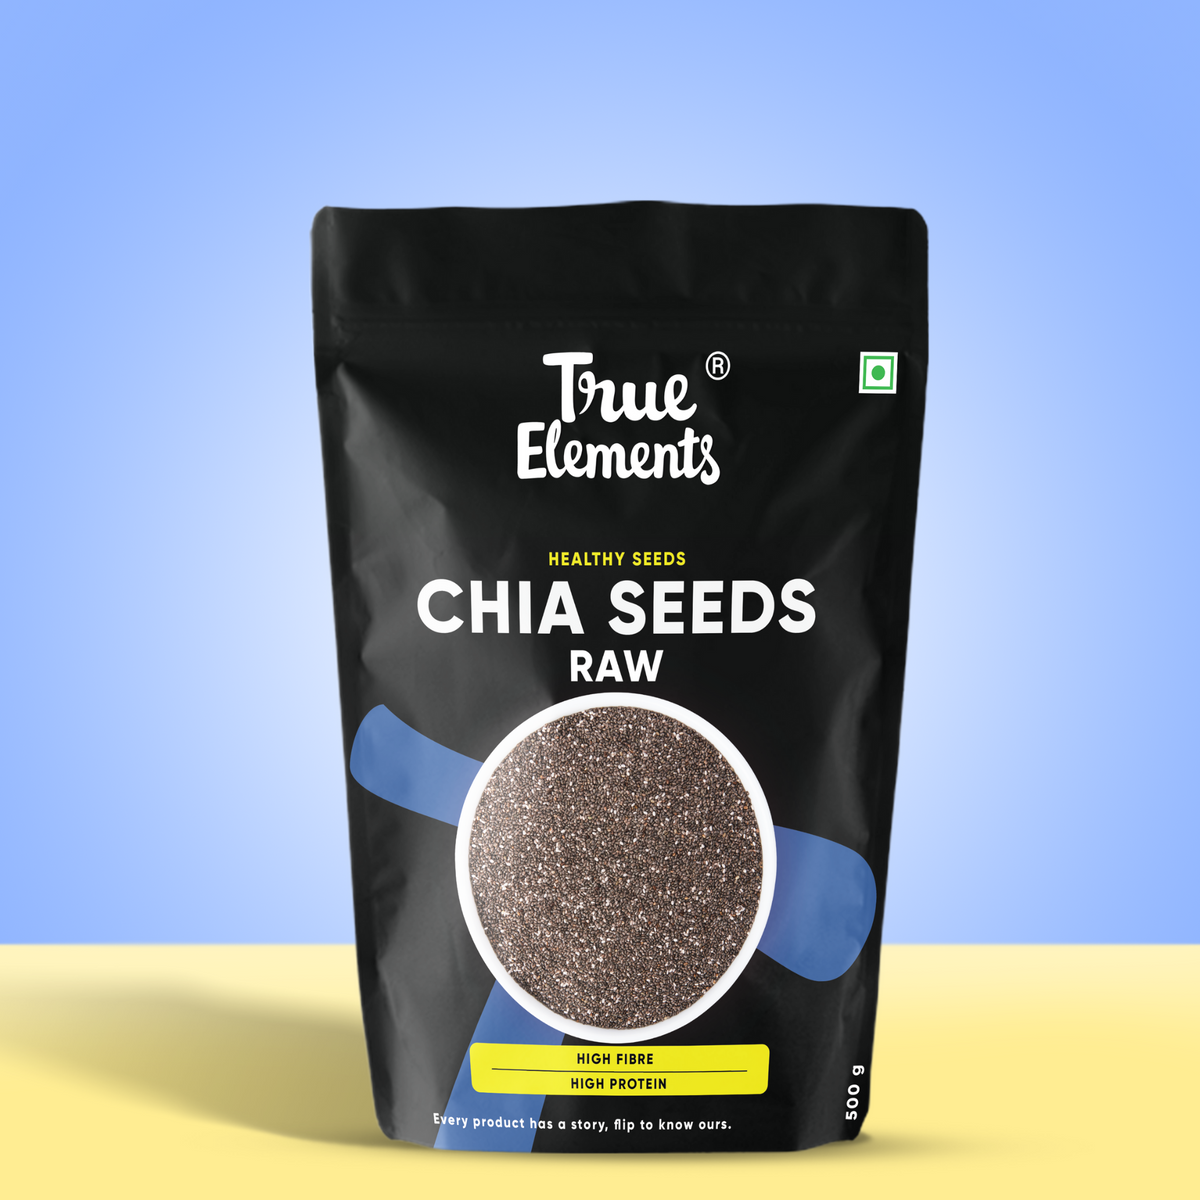 True elements raw chia seeds 250g pouch (Premium Whole Seeds)